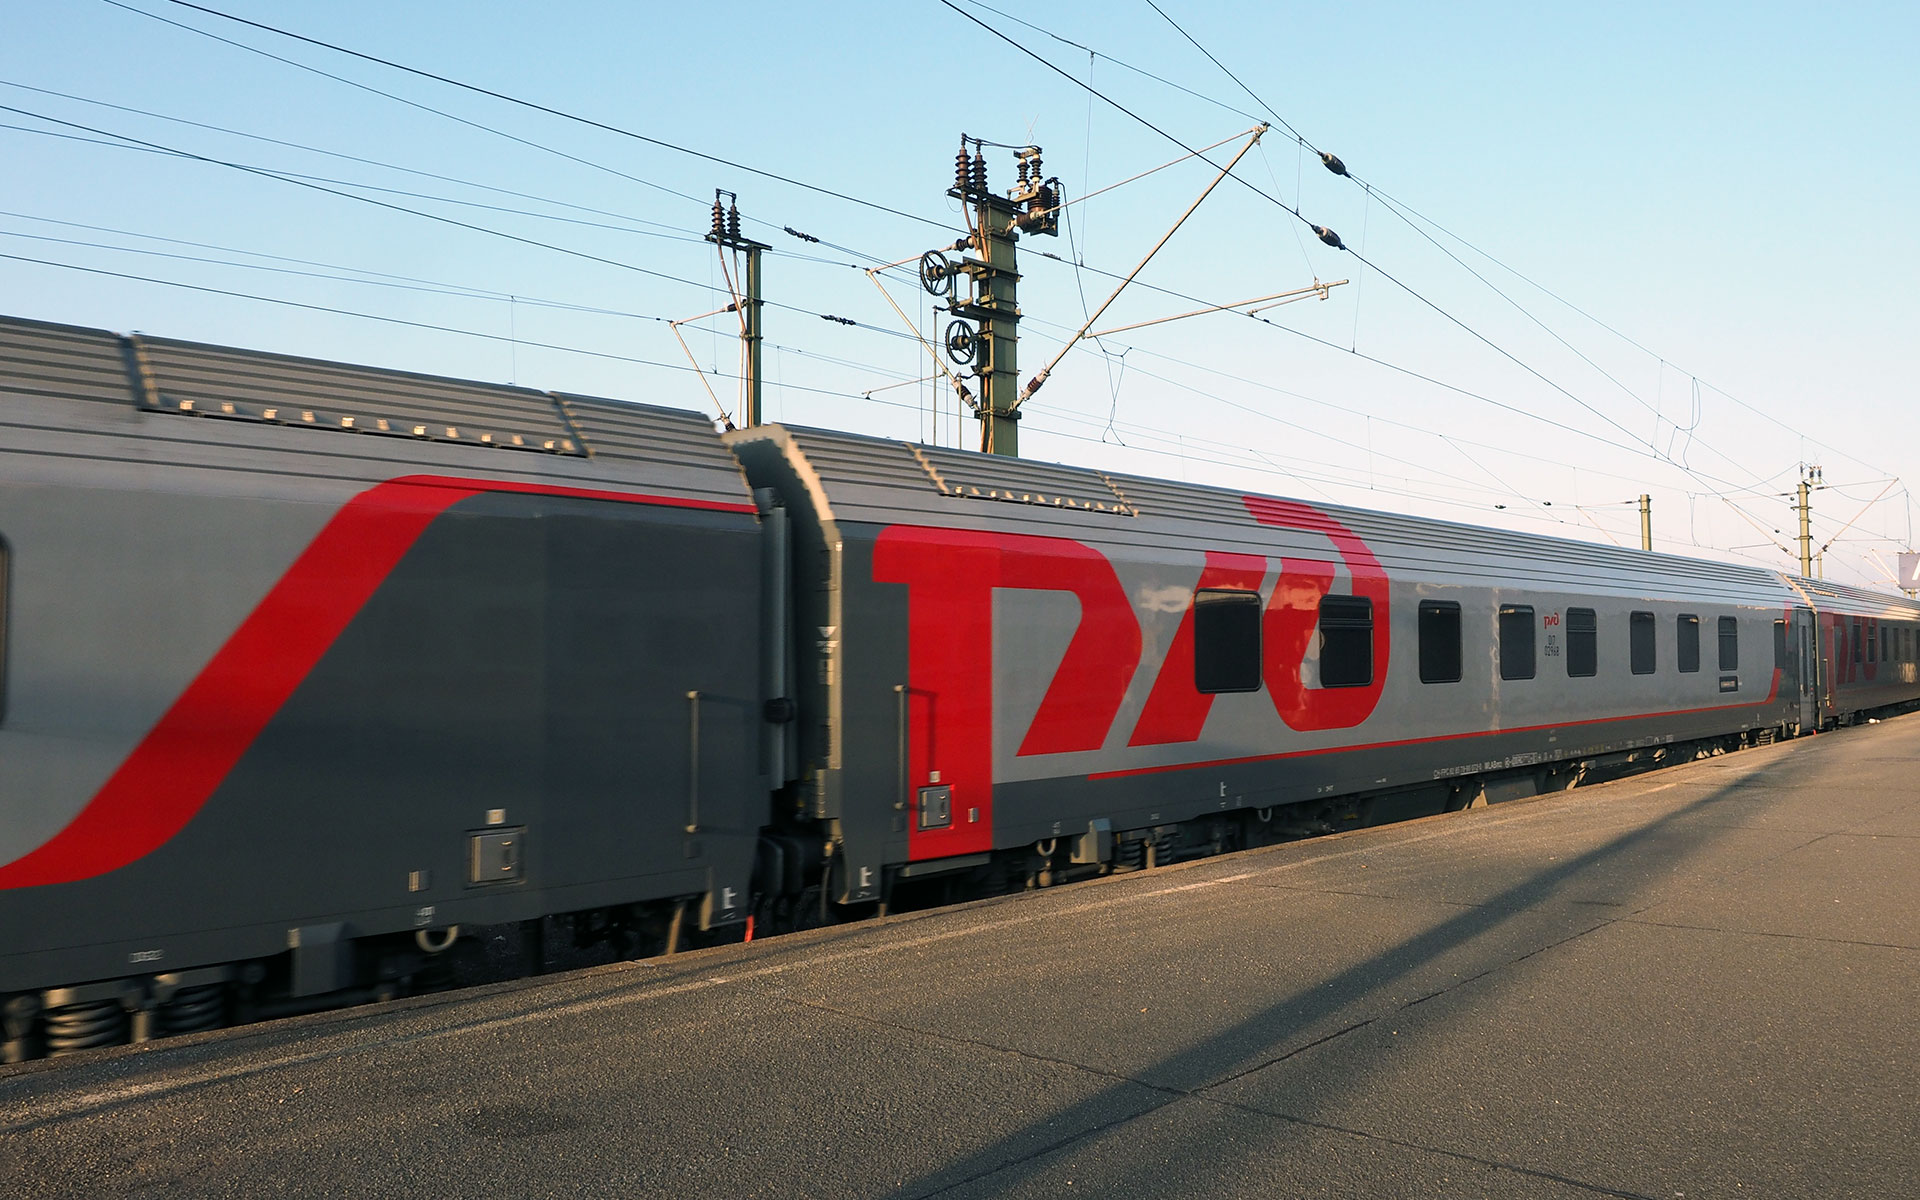 The Russian Railways (RZD) train from Moscow to Paris seen here in Hannover. From mid-June 2015 the service will cease to run through Germany during the day, but will be retimed to provide a new overnight service between Berlin and Paris. The carriage decorated with the RZD logo is one of the new Austrian-built sleepers introduced on this route in January 2015 (photo © hidden europe).